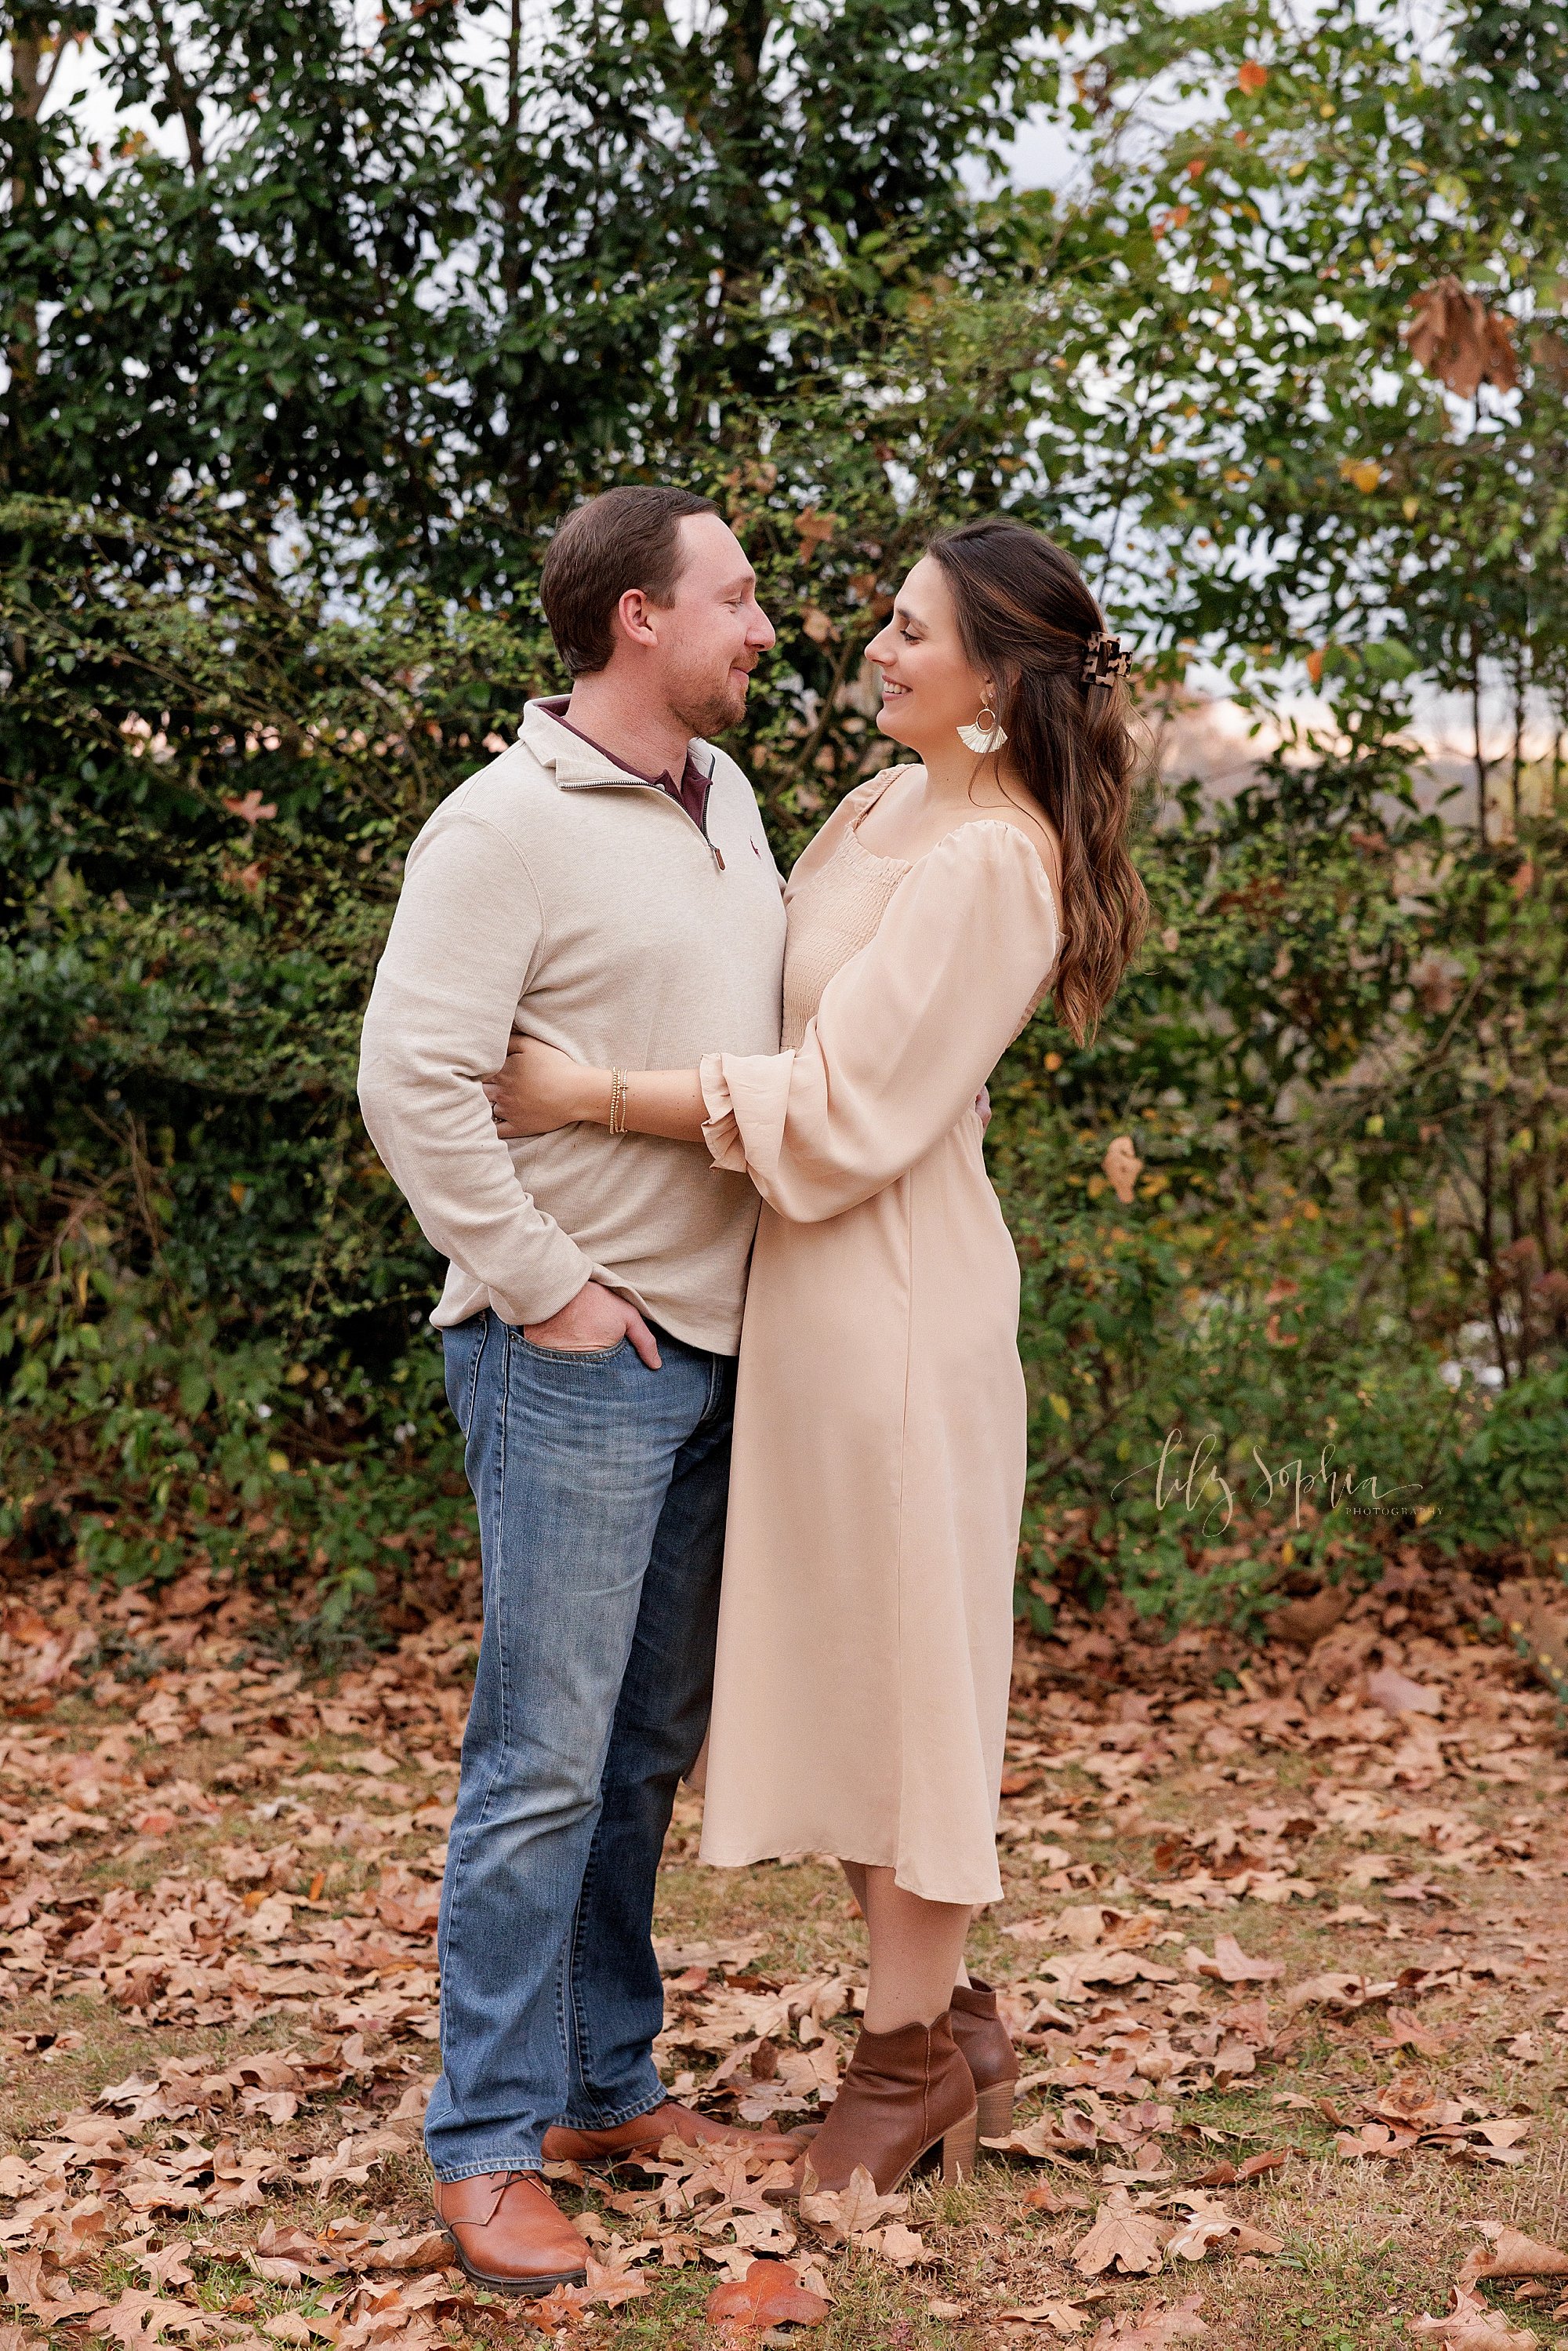 intown-atlanta-morningside-decatur-brookhaven-buckhead-outdoor-couples-maternity-fall-photoshoot-daschunds-doxies-gender-reveal_6194.jpg